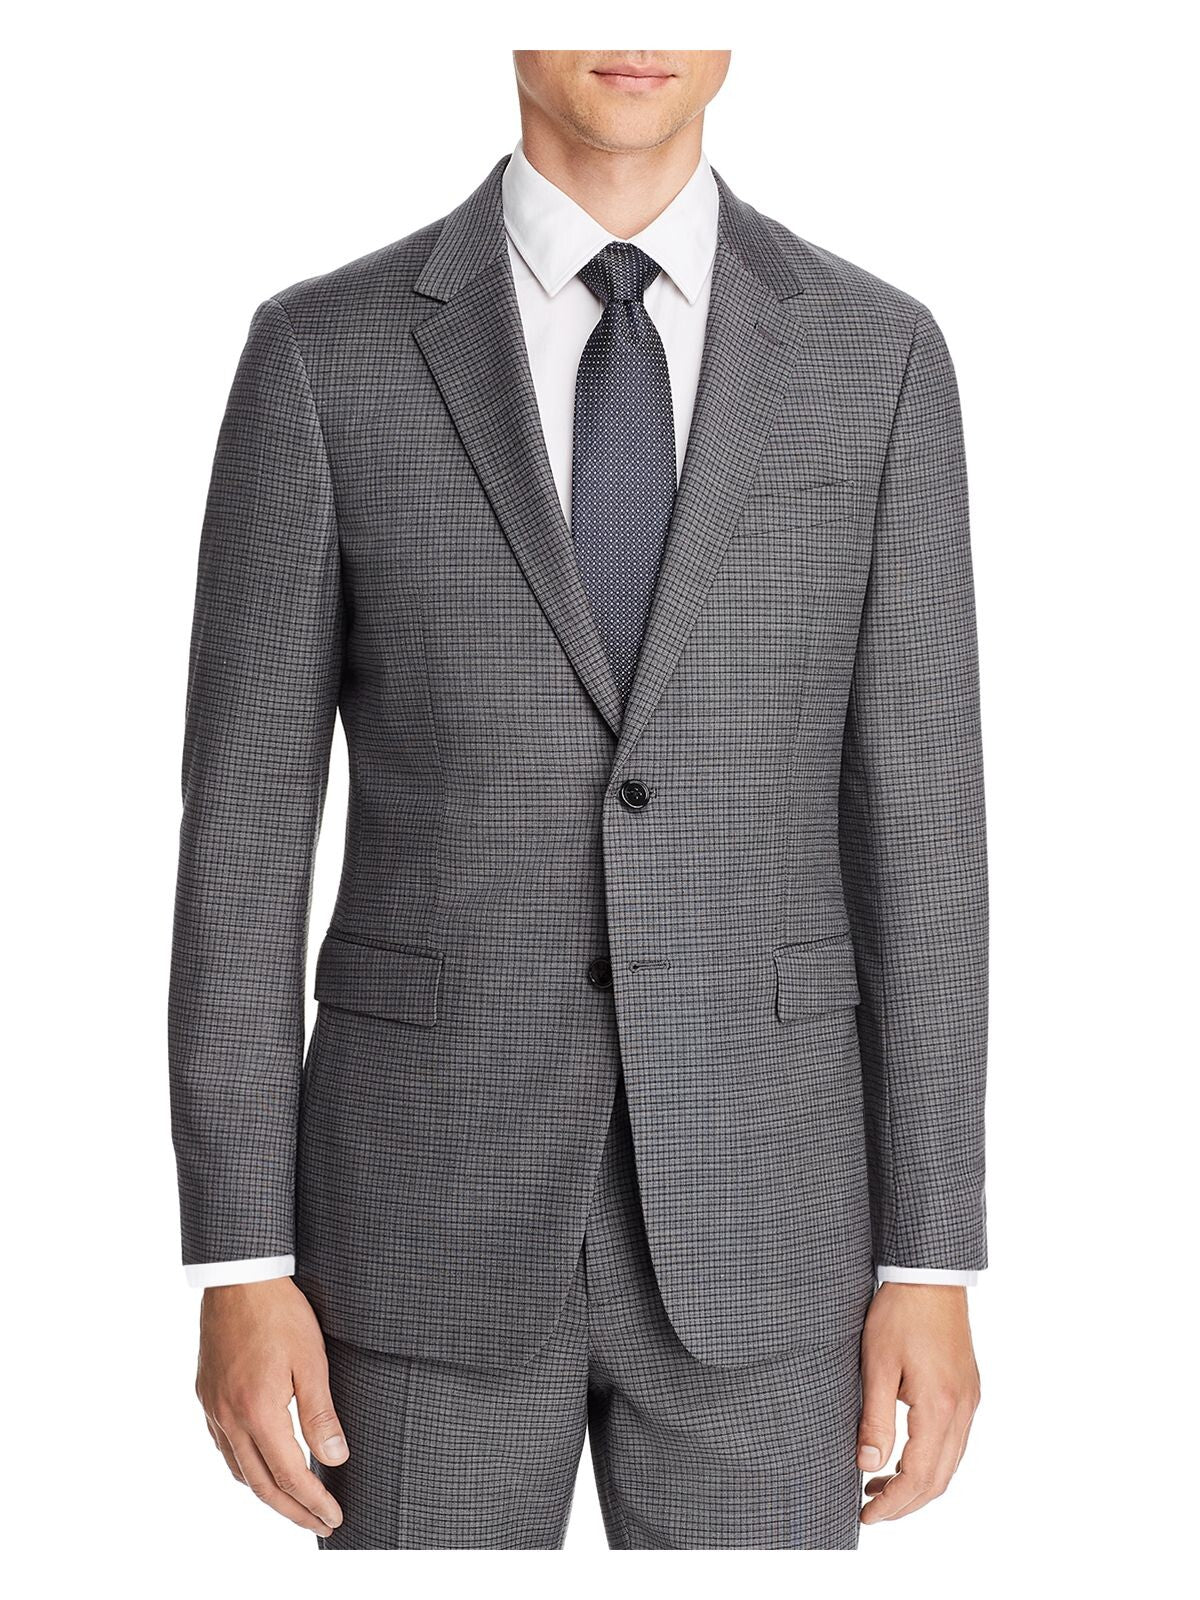 THEORY Mens Chambers Gray Single Breasted, Check Wool Blend Blazer Jacket 40R